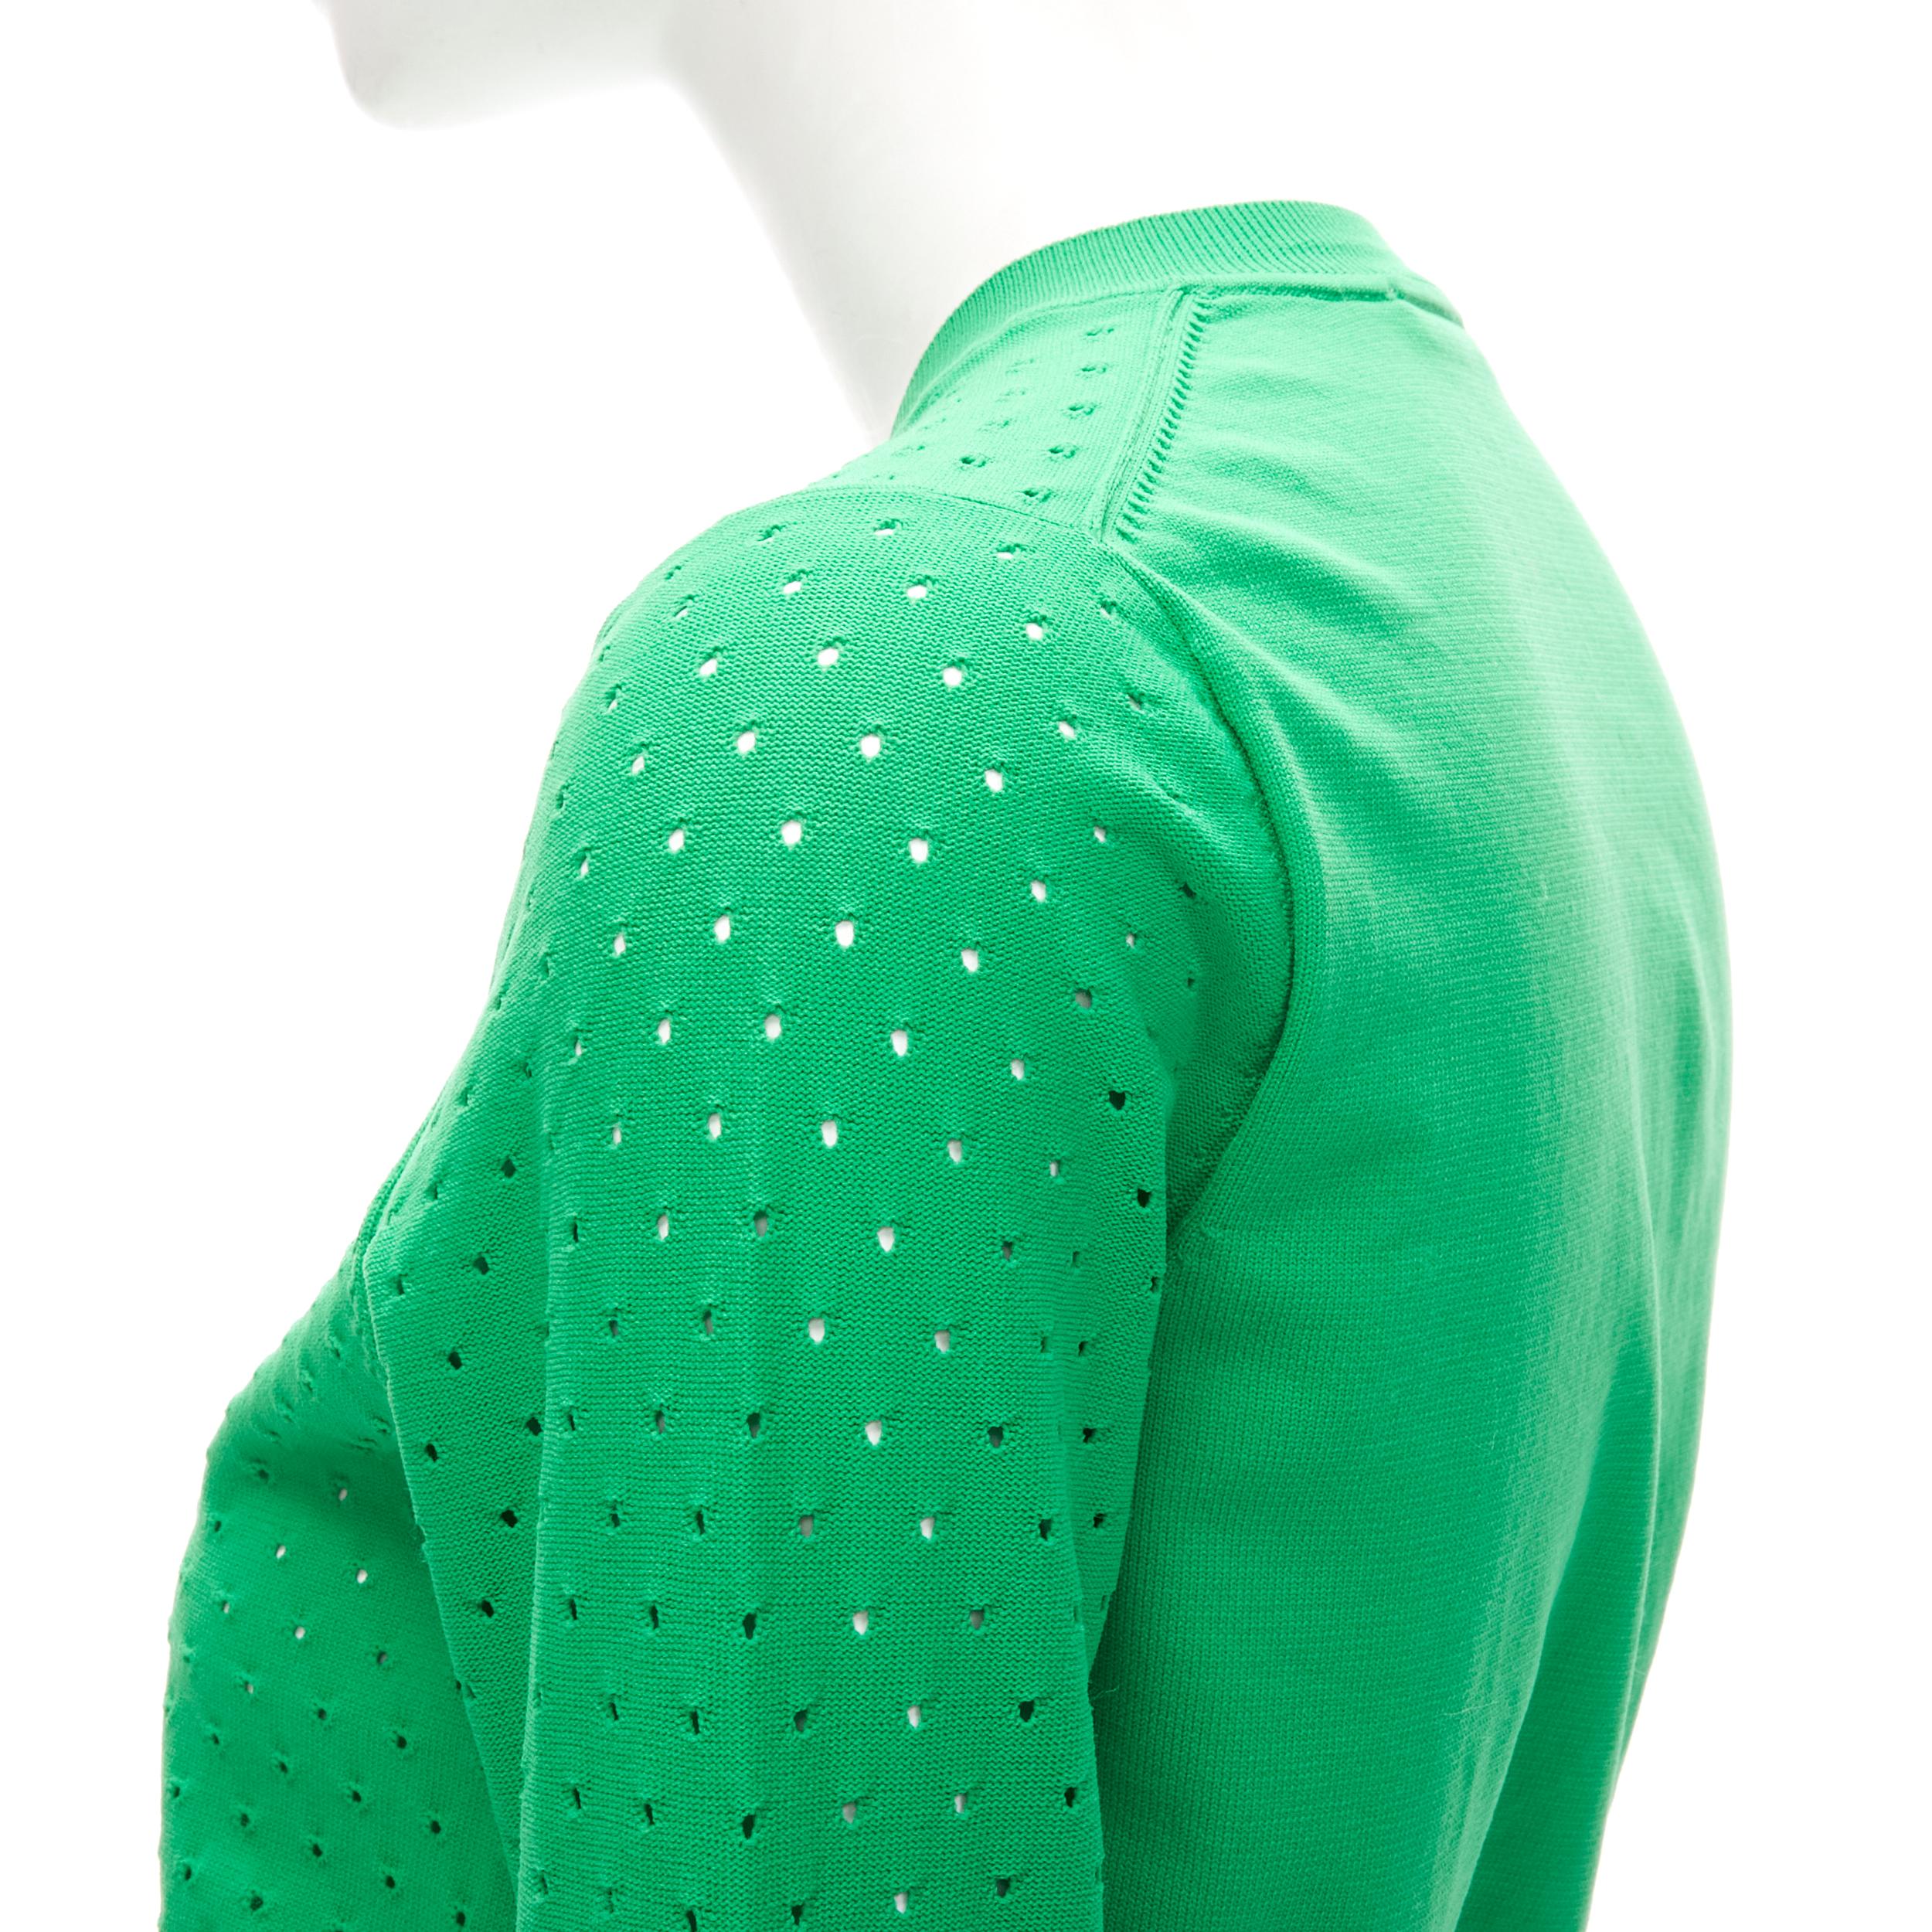 Women's ACNE STUDIOS kelly green perforated cropped cardigan sweater S